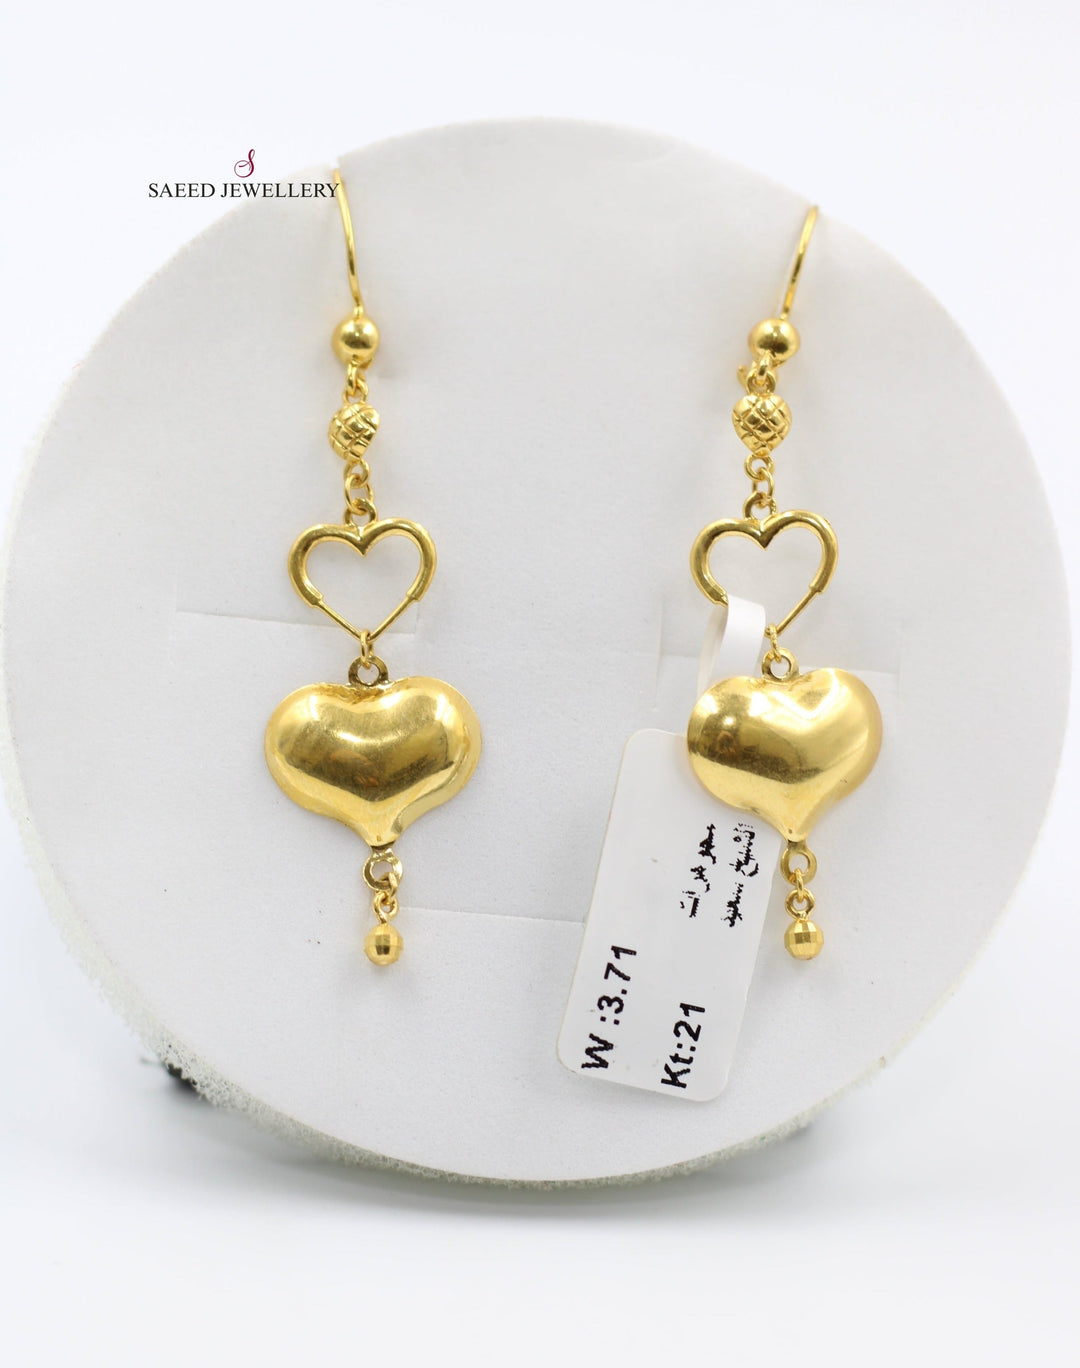 21K Fancy Earrings Made of 21K Yellow Gold by Saeed Jewelry-حلق-اكسترا-18